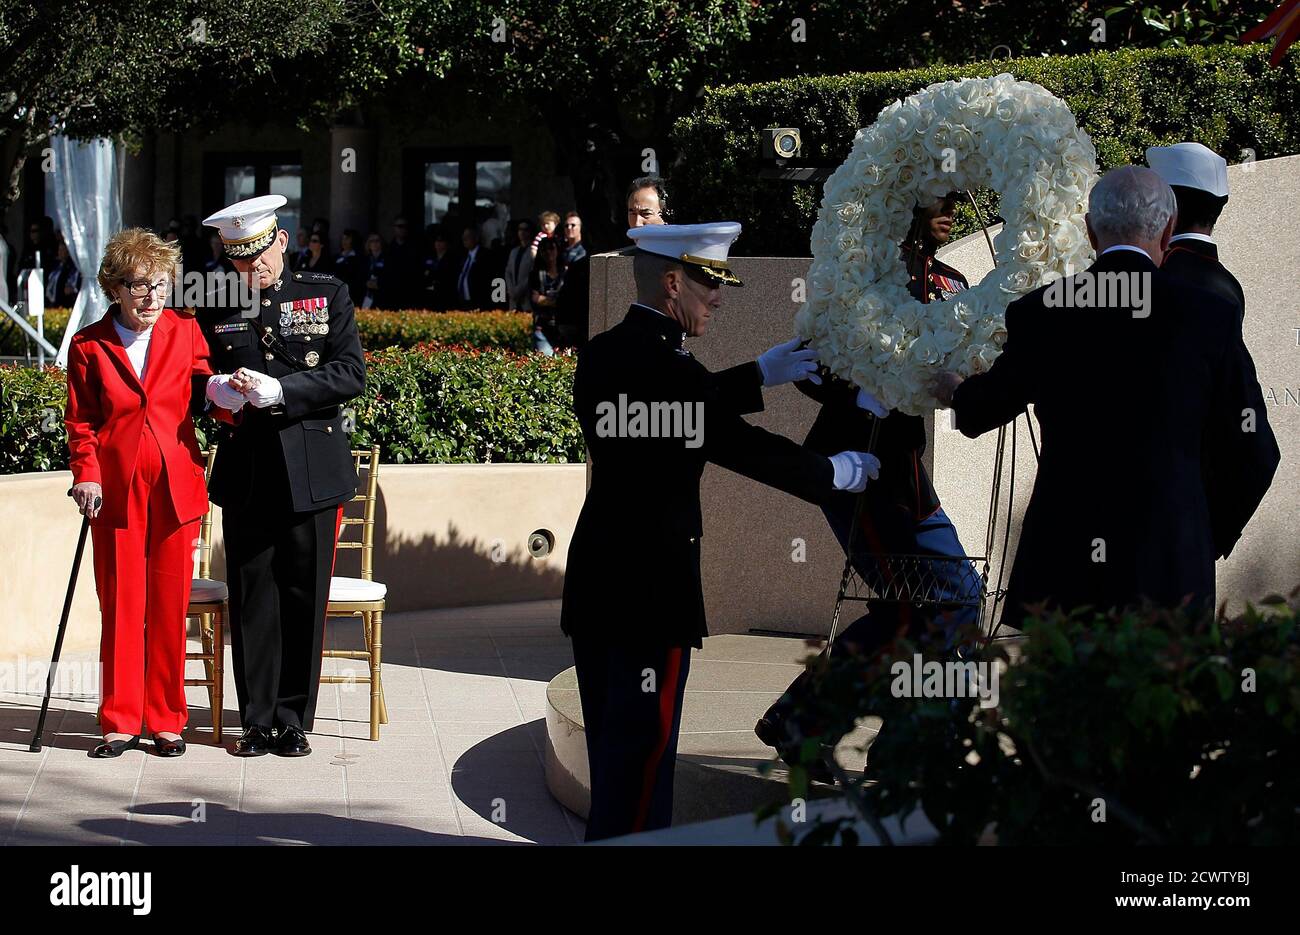 U.S. Marine Corps Lieutenant General George Flynn escorts former U.S First Lady Nancy Reagan (L) during the laying of the wreath at the resting place of her husband former U.S. president, Ronald Reagan, during the posthumous celebration of his 100th birthday at the President Reagan Memorial Site at Reagan Library in Simi Valley, California. February 6, 2011.  REUTERS/Chris Carlson/Pool (UNITED STATES - Tags: POLITICS ANNIVERSARY OBITUARY) Stock Photo